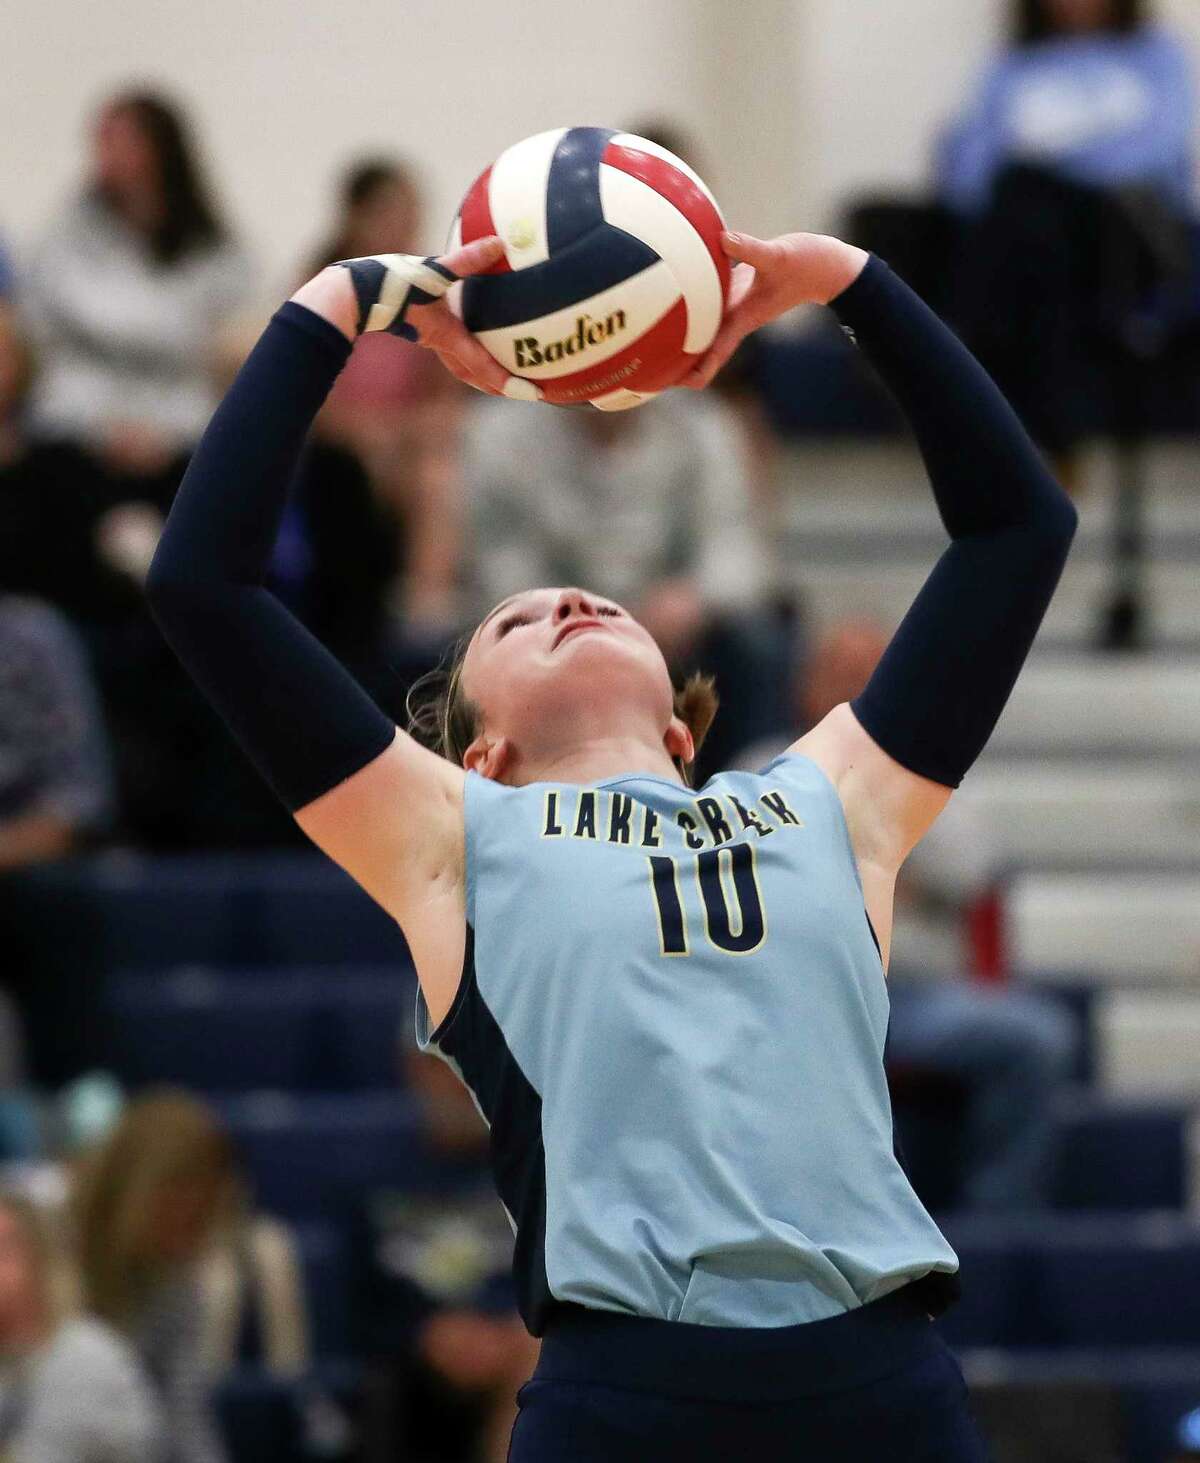 Lake Creek's Lauren Greene (10) sets the ball in the second set of a District 21-5A high school volleyball match at Lake Creek High School, Tuesday, Oct. 18, 2022, in Montgomery.